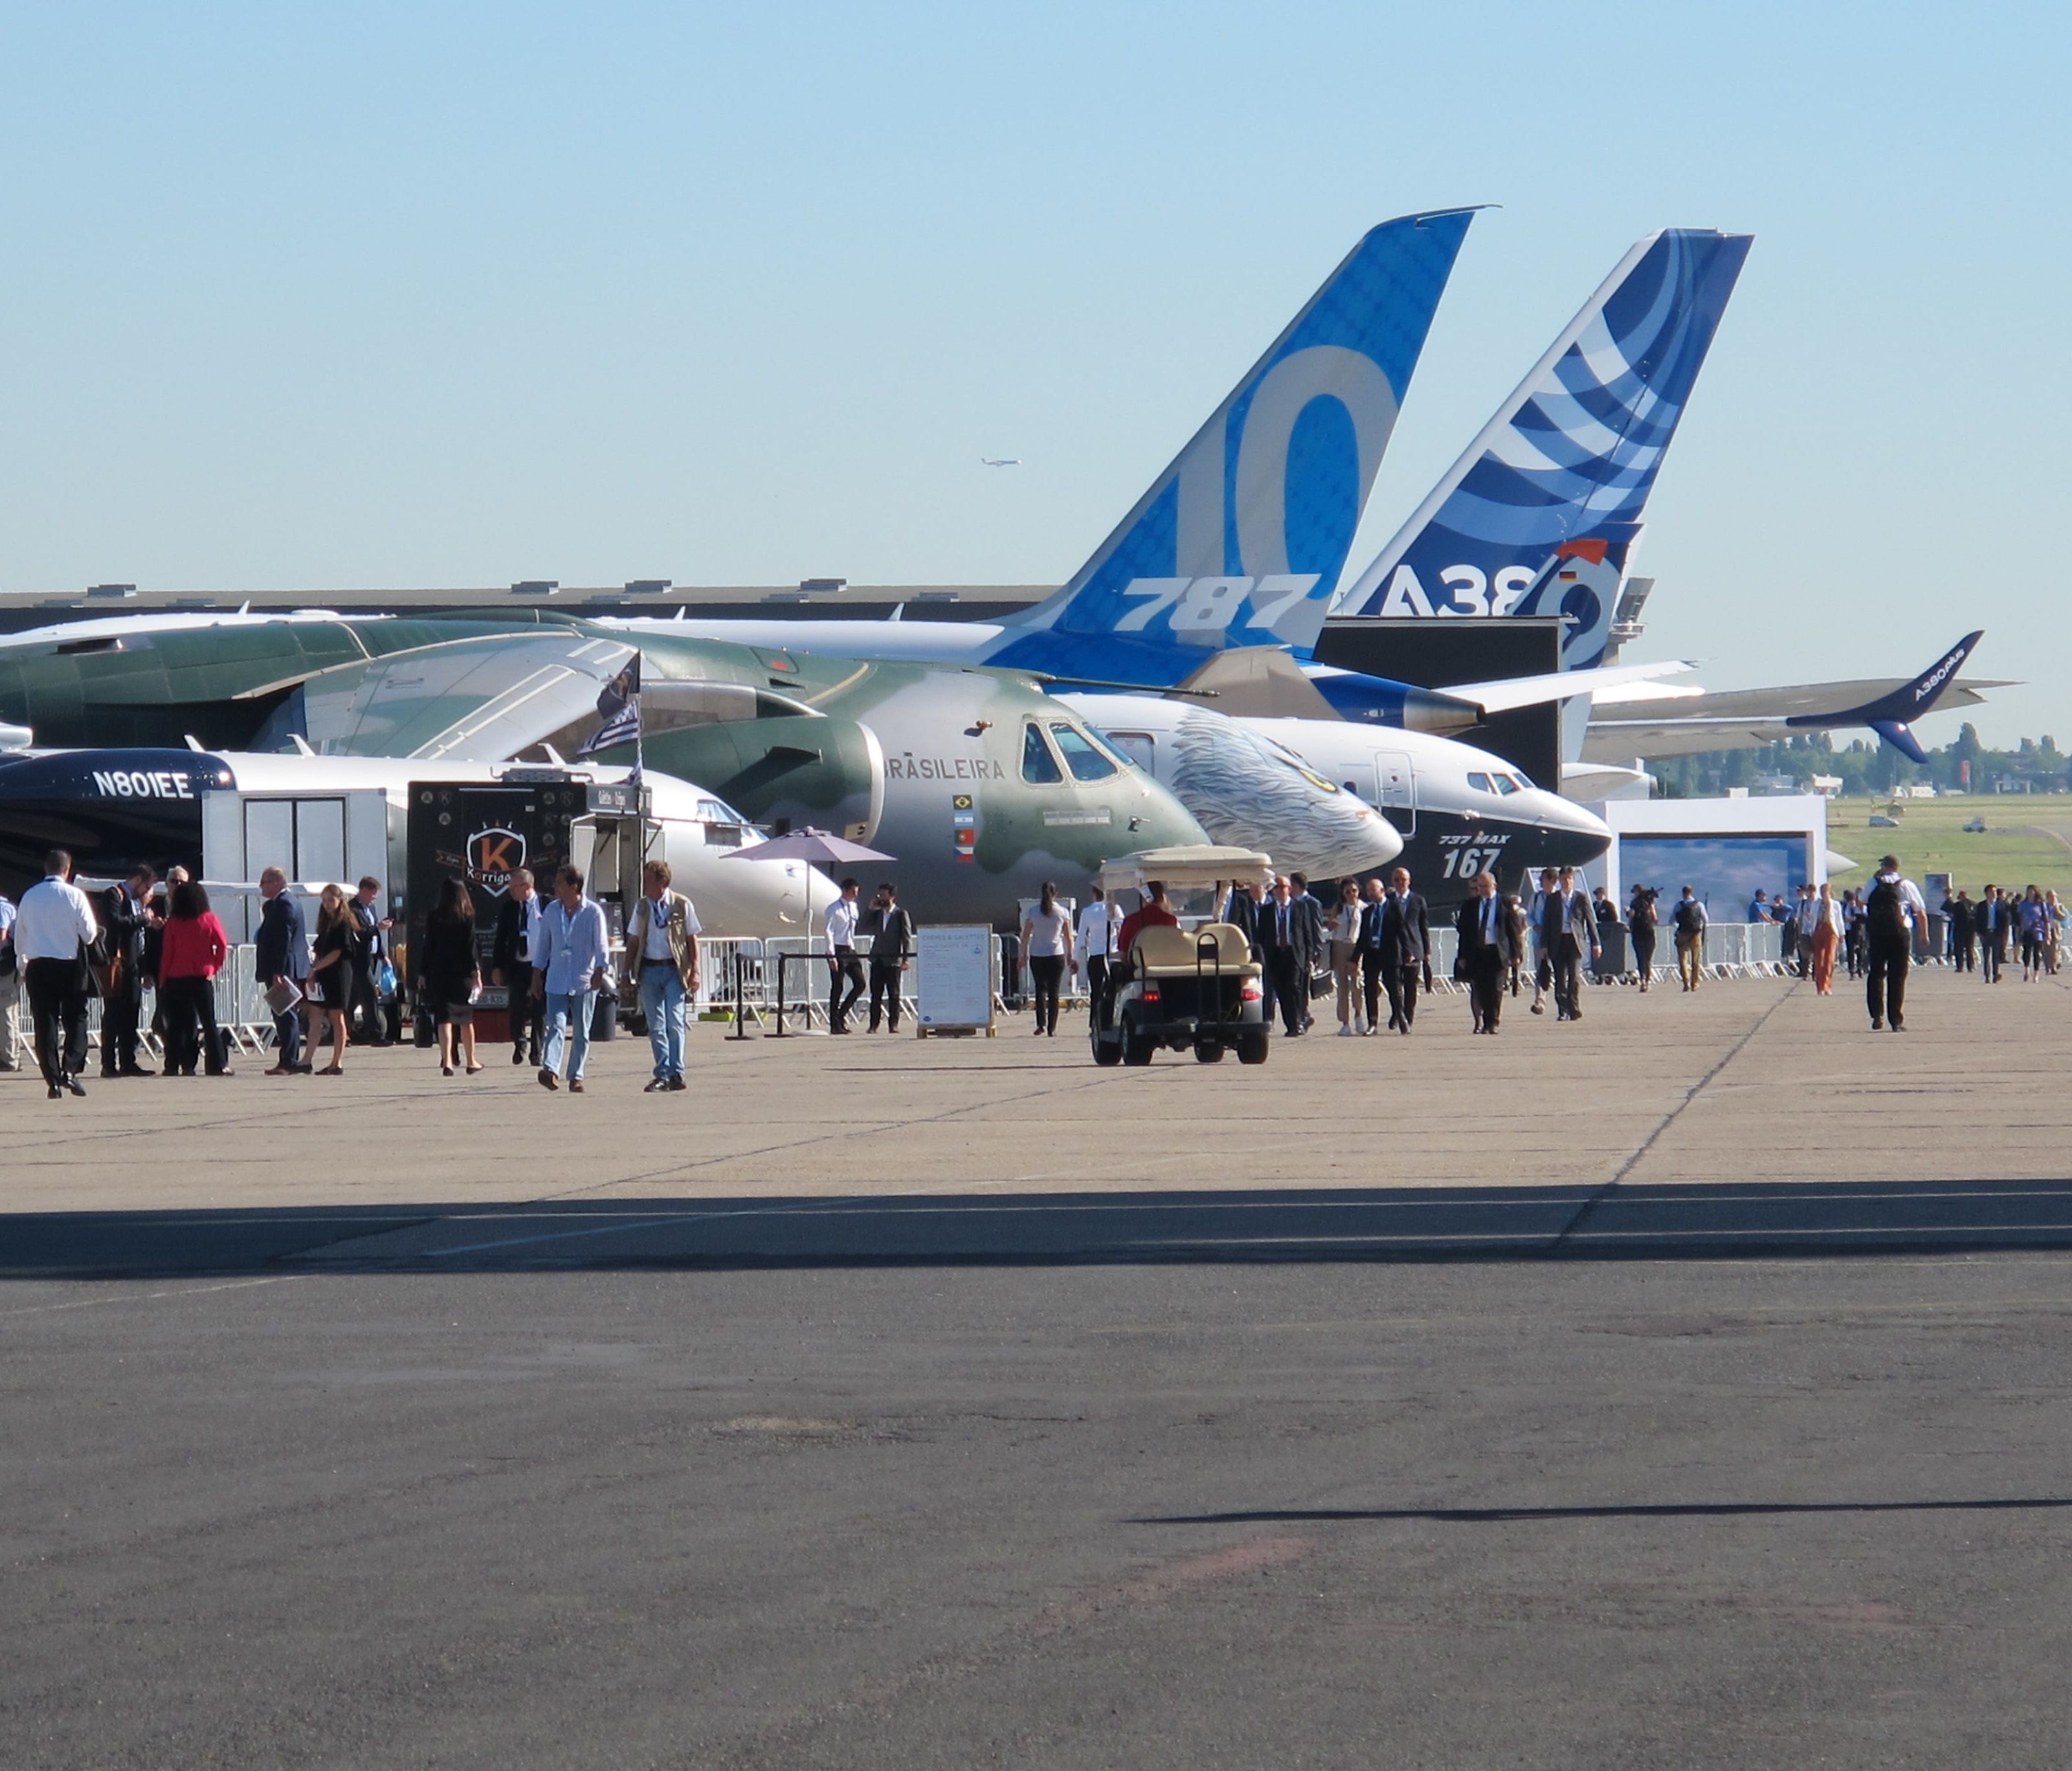 Visitors check out the line-up of planes on display Monday (June 19, 2017) at the Paris Air Show.